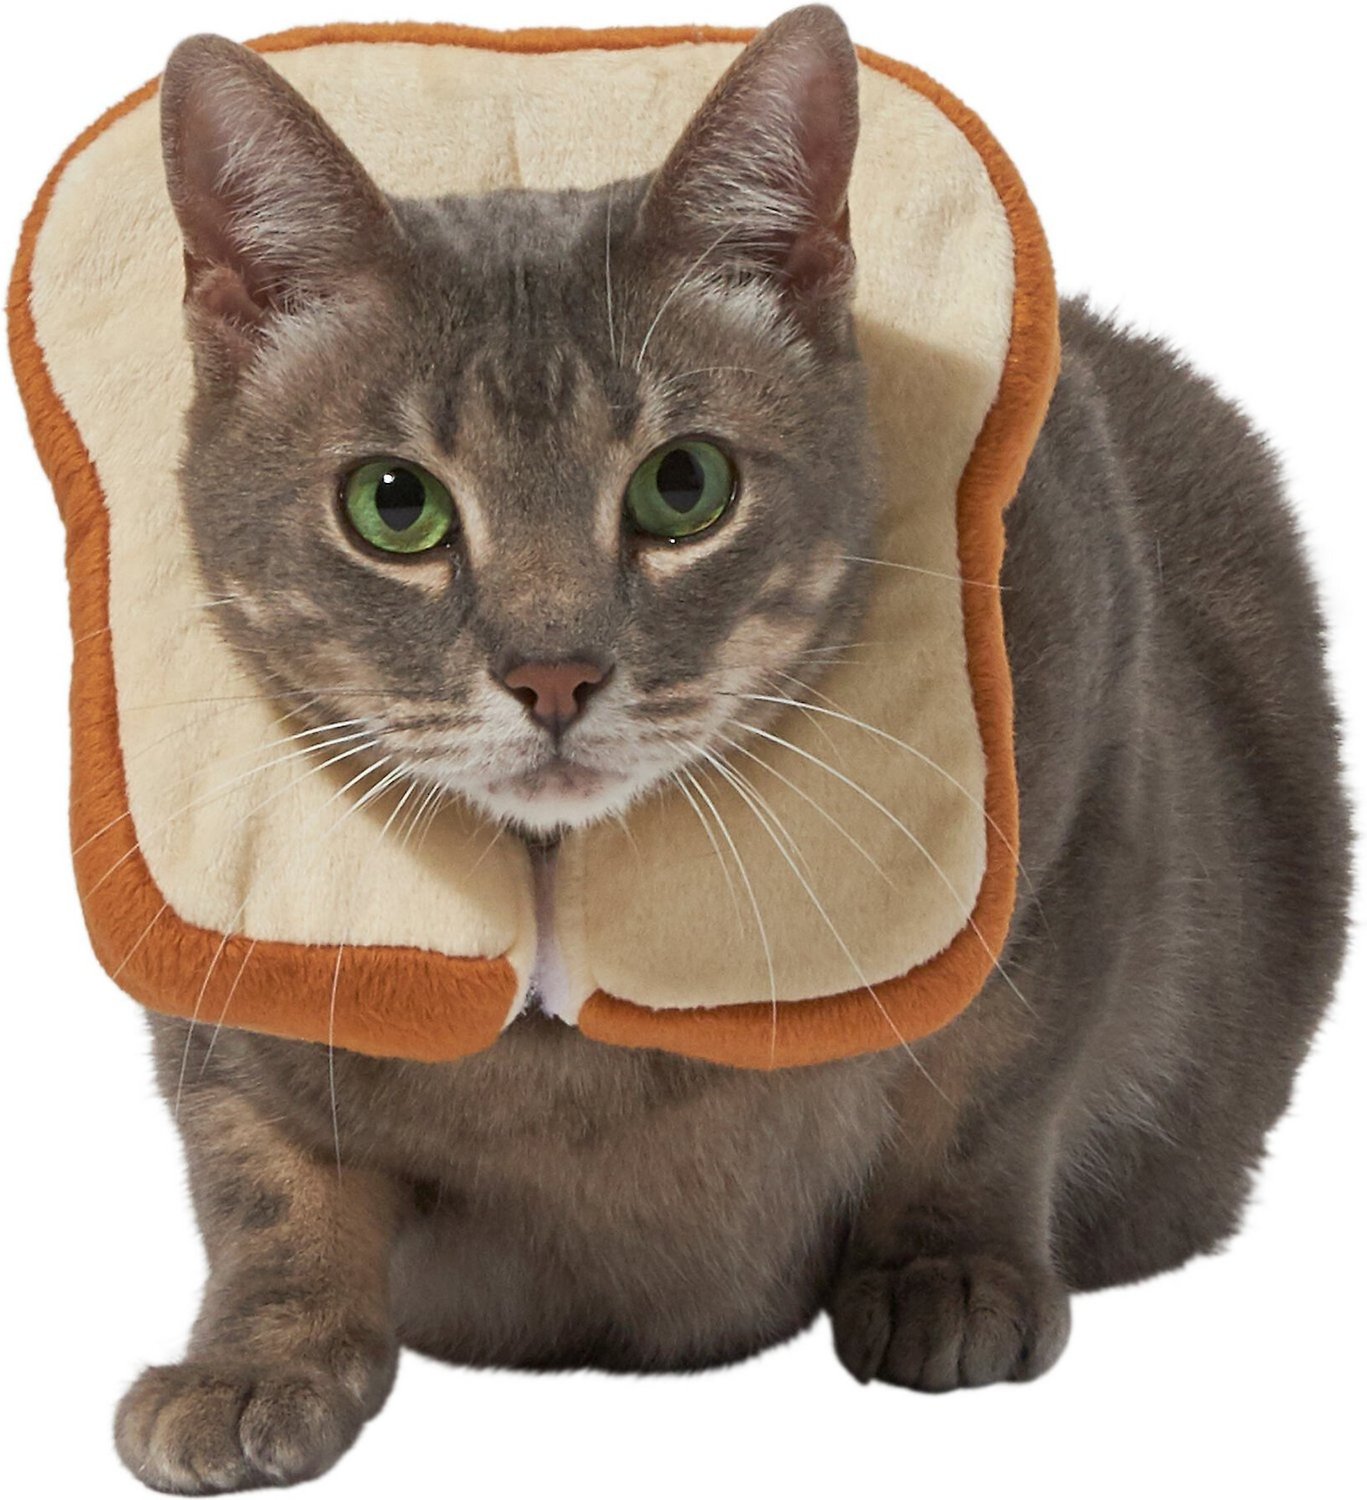 Frisco Bread Cat Costume, One Size By Frisco
